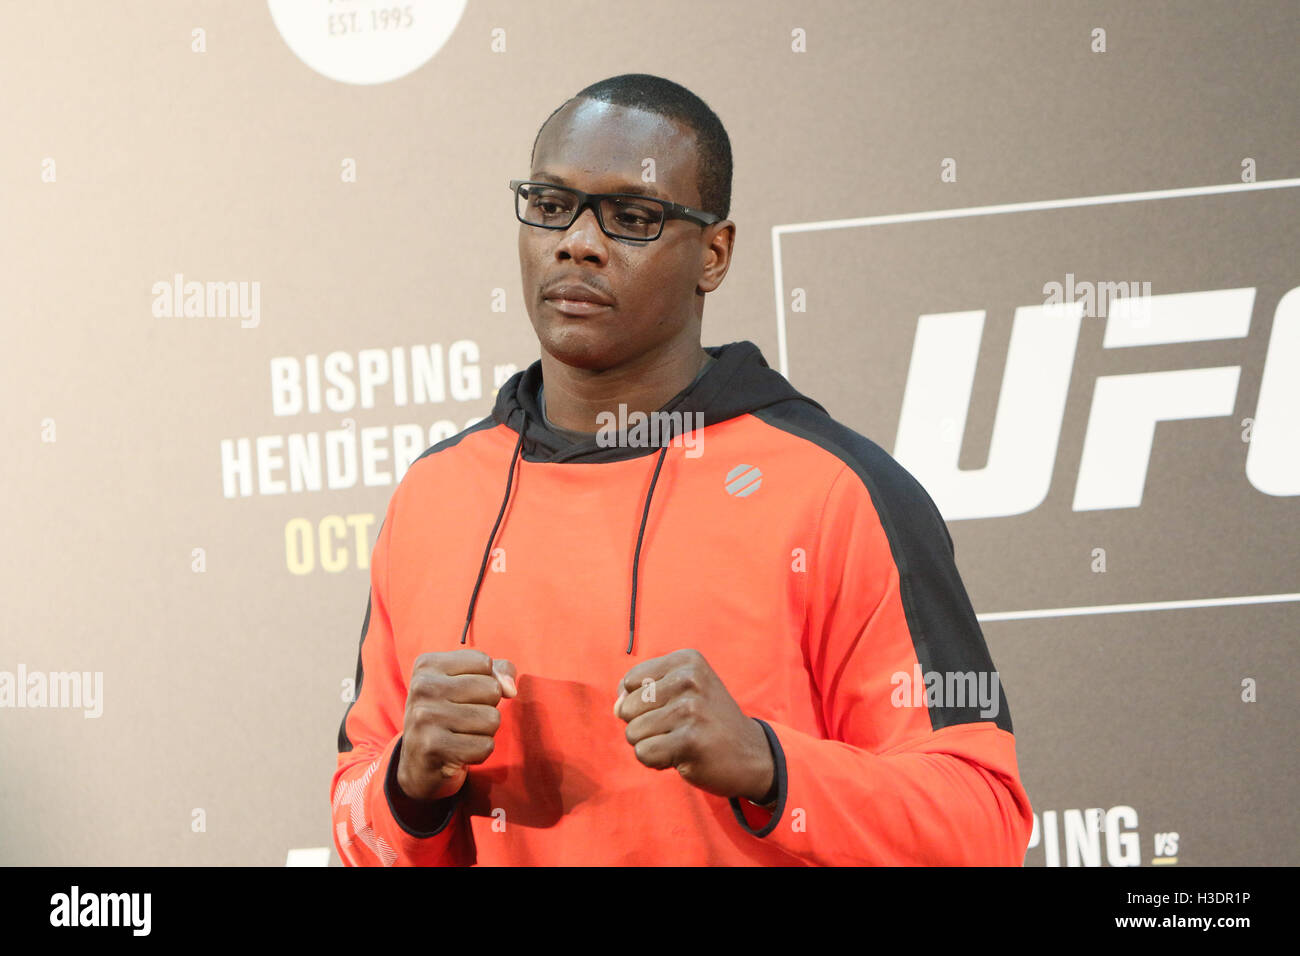 Manchester, UK. 6th October, 2016. UFC 204 - Media Day at Arena Manchester. Thursday the 6 of Oct. 2016. Ovince Saint Preux faces the media ahead of UFC 204.   Credit:  Dan Cooke/Alamy Live News Stock Photo